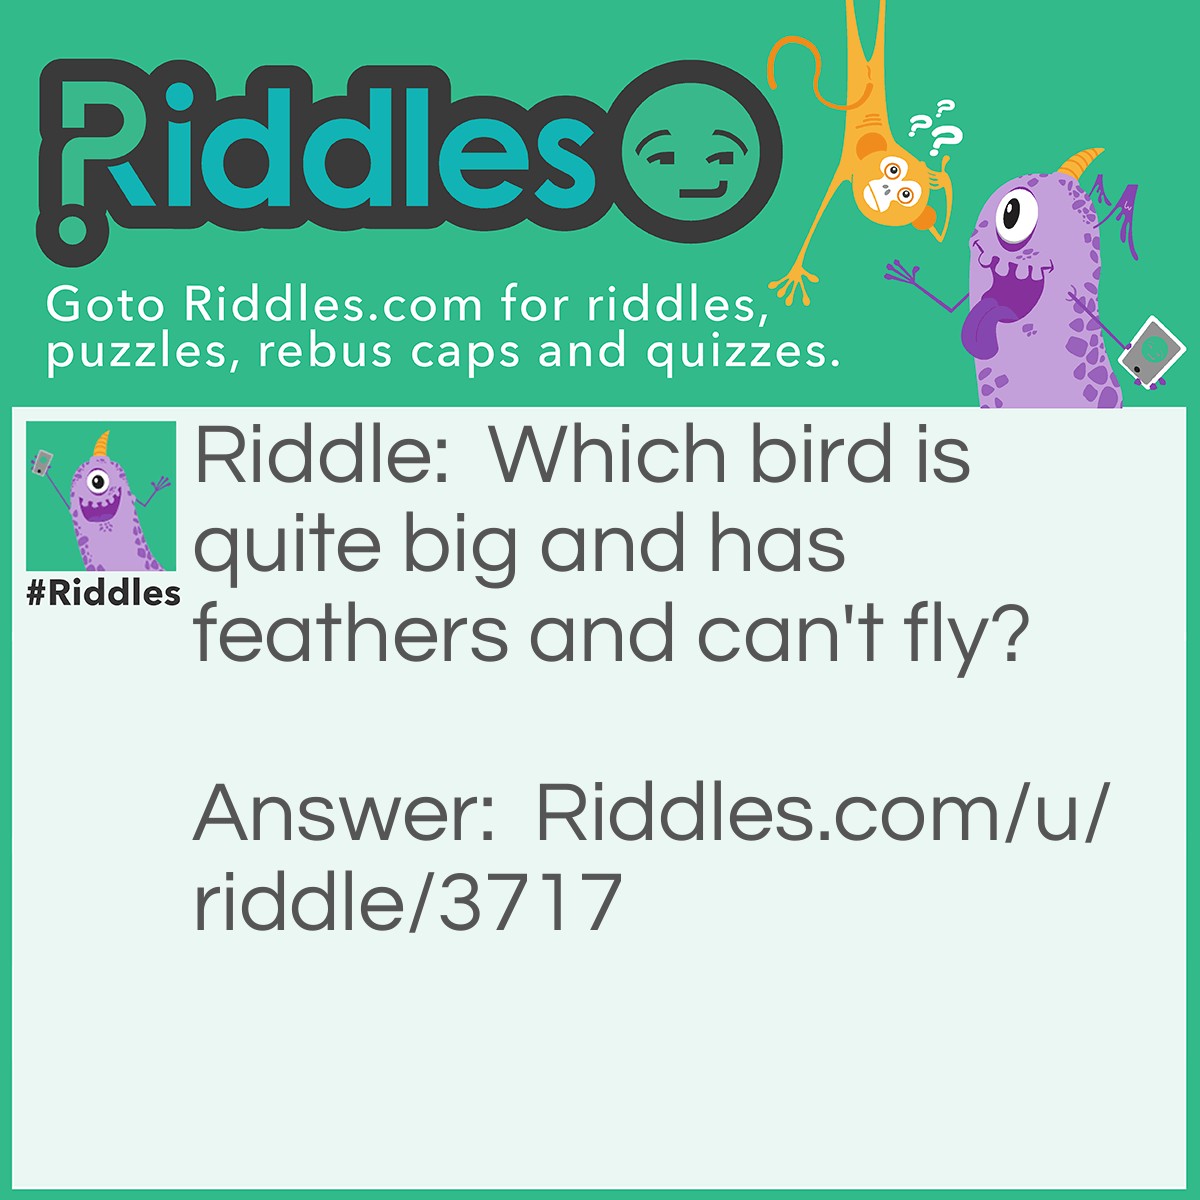 Riddle: Which bird is quite big and has feathers and can't fly? Answer: An Ostrich.